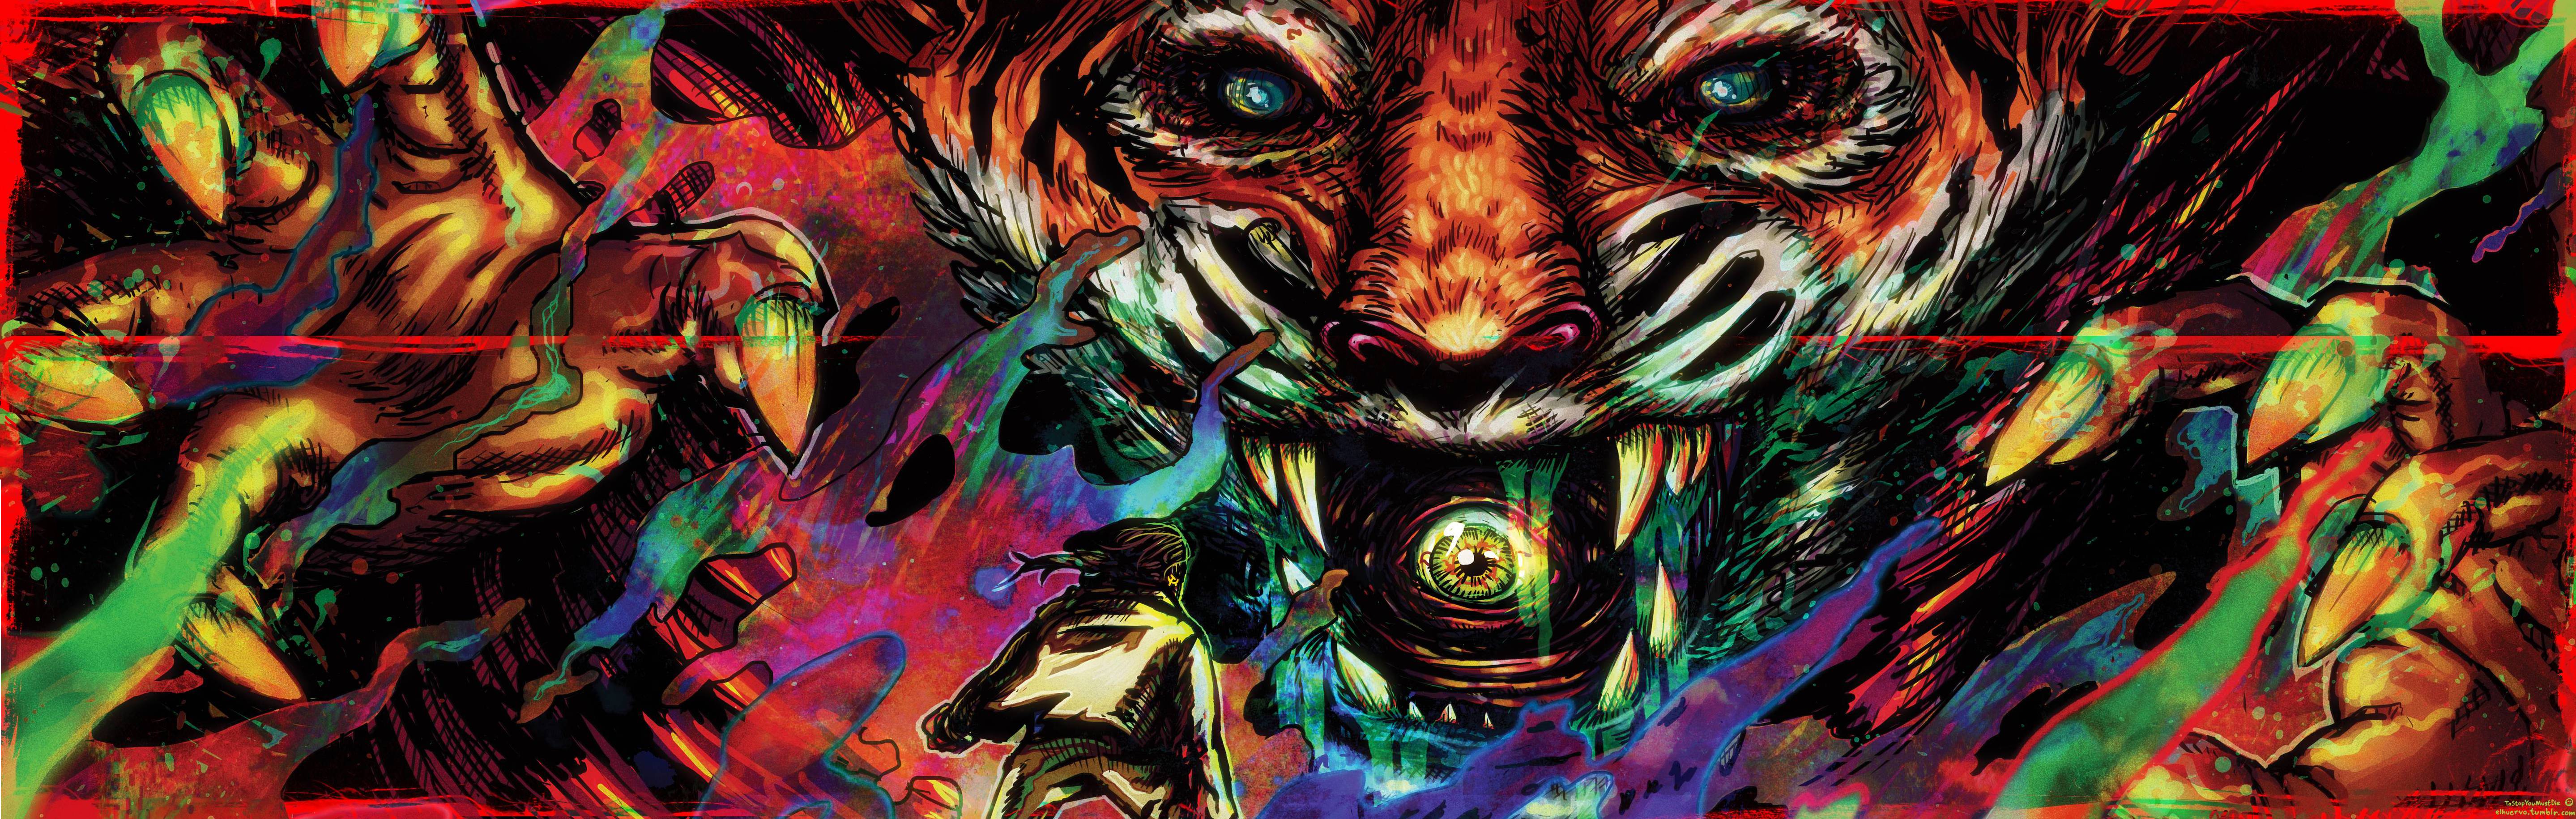 Video Game Hotline Miami 2: Wrong Number HD Wallpaper | Background Image